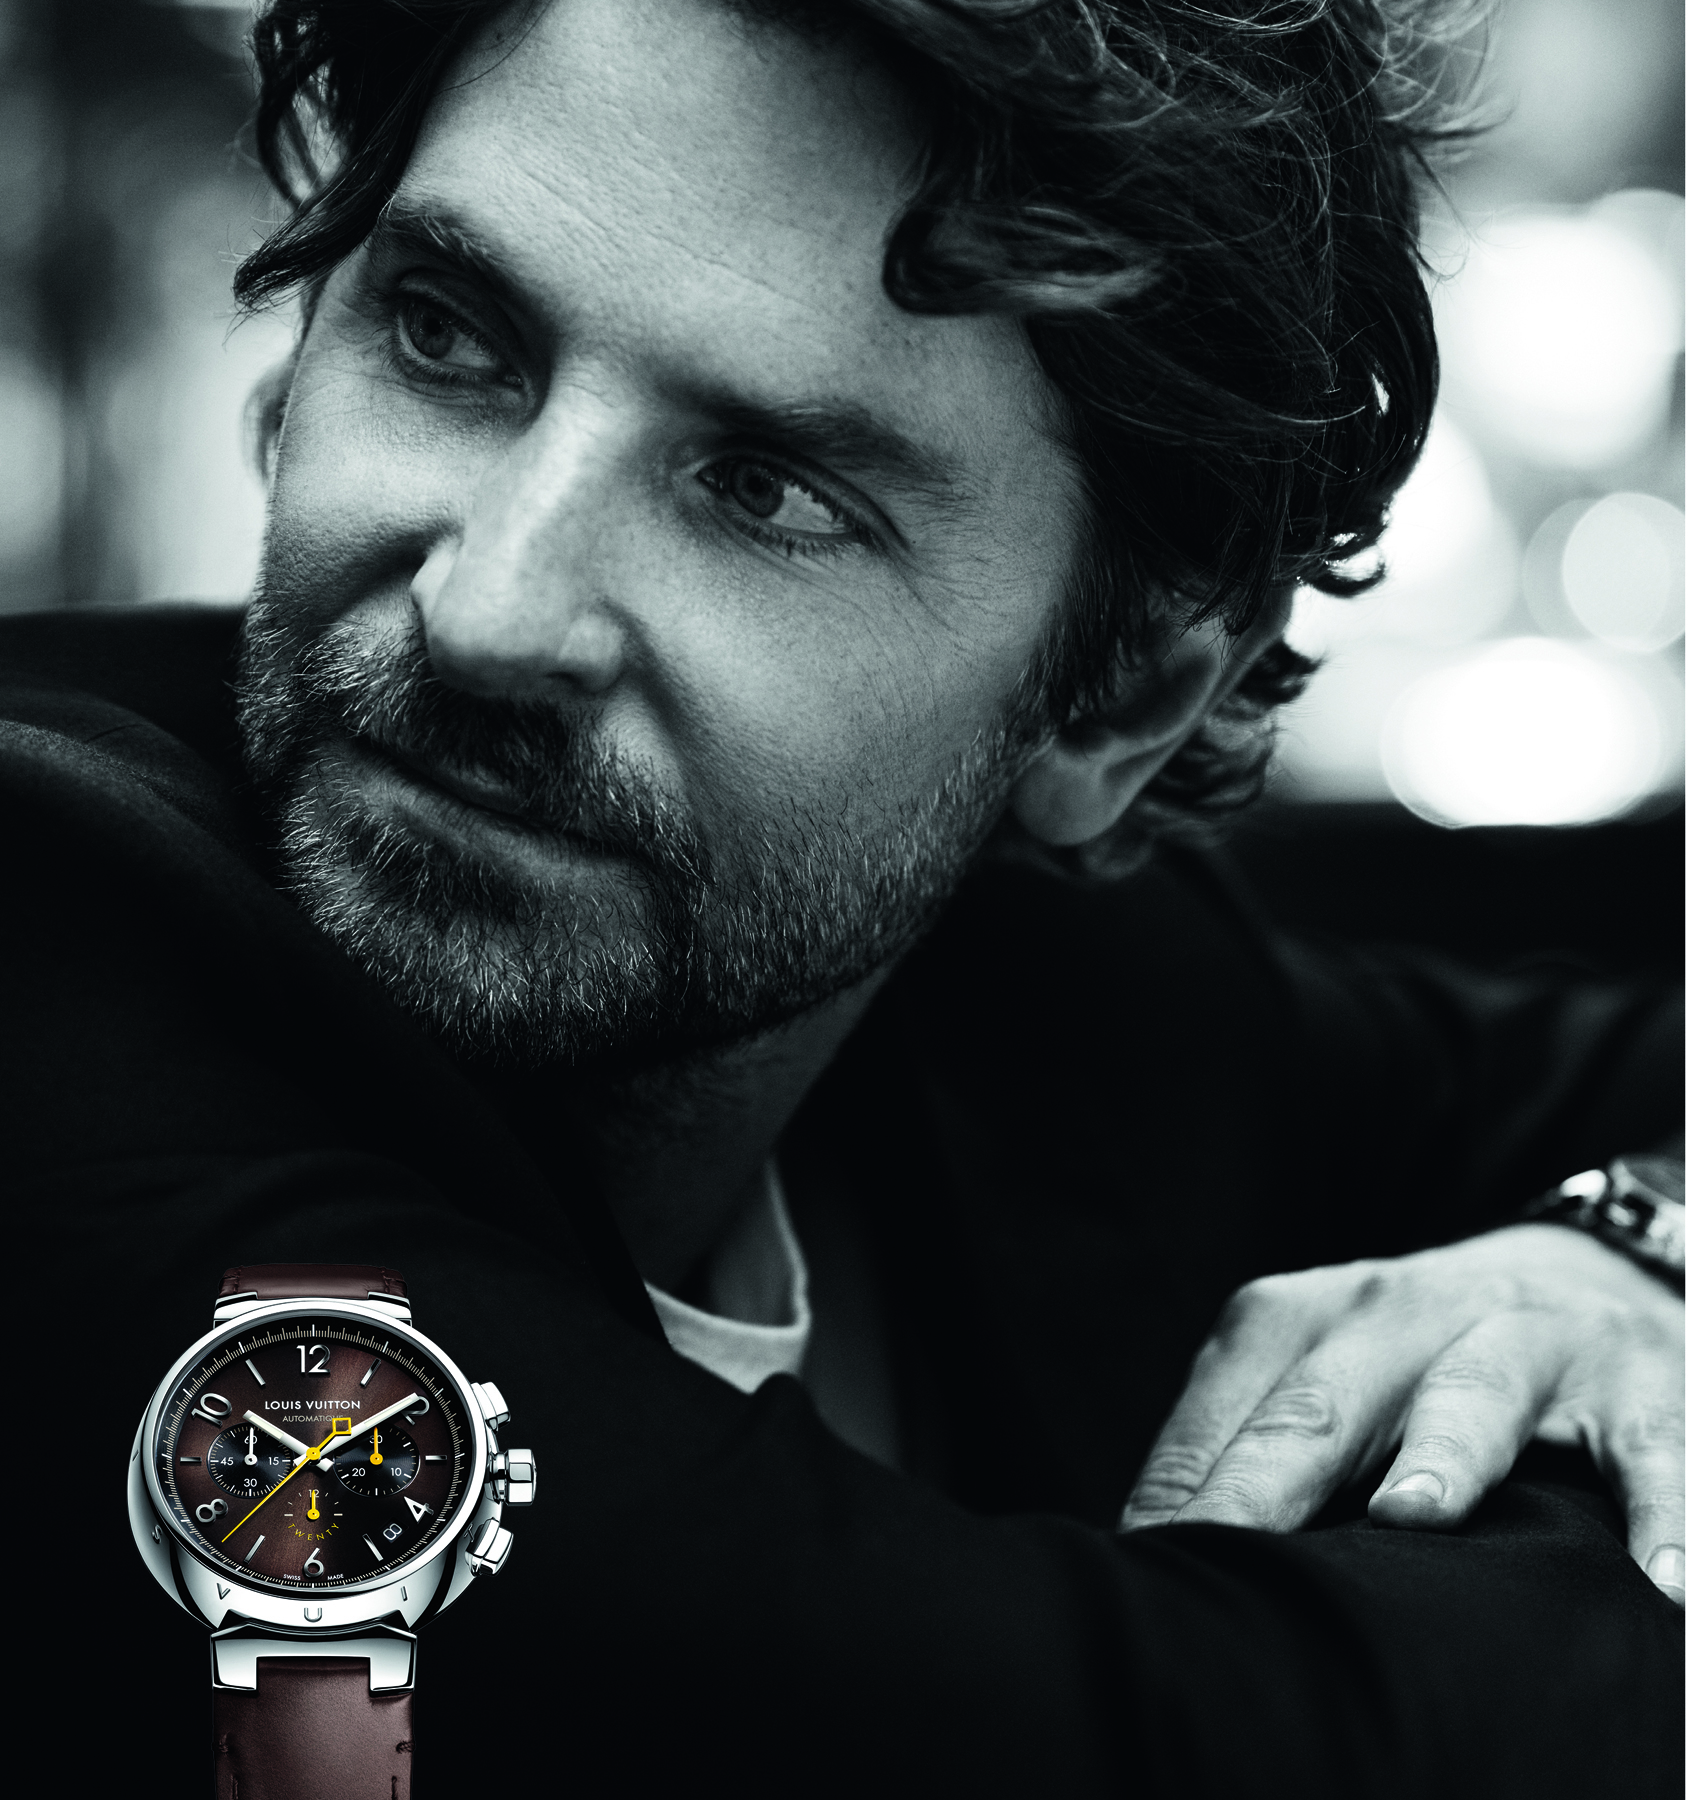 Bradley Cooper fronts campaign for 20th anniversary Louis Vuitton